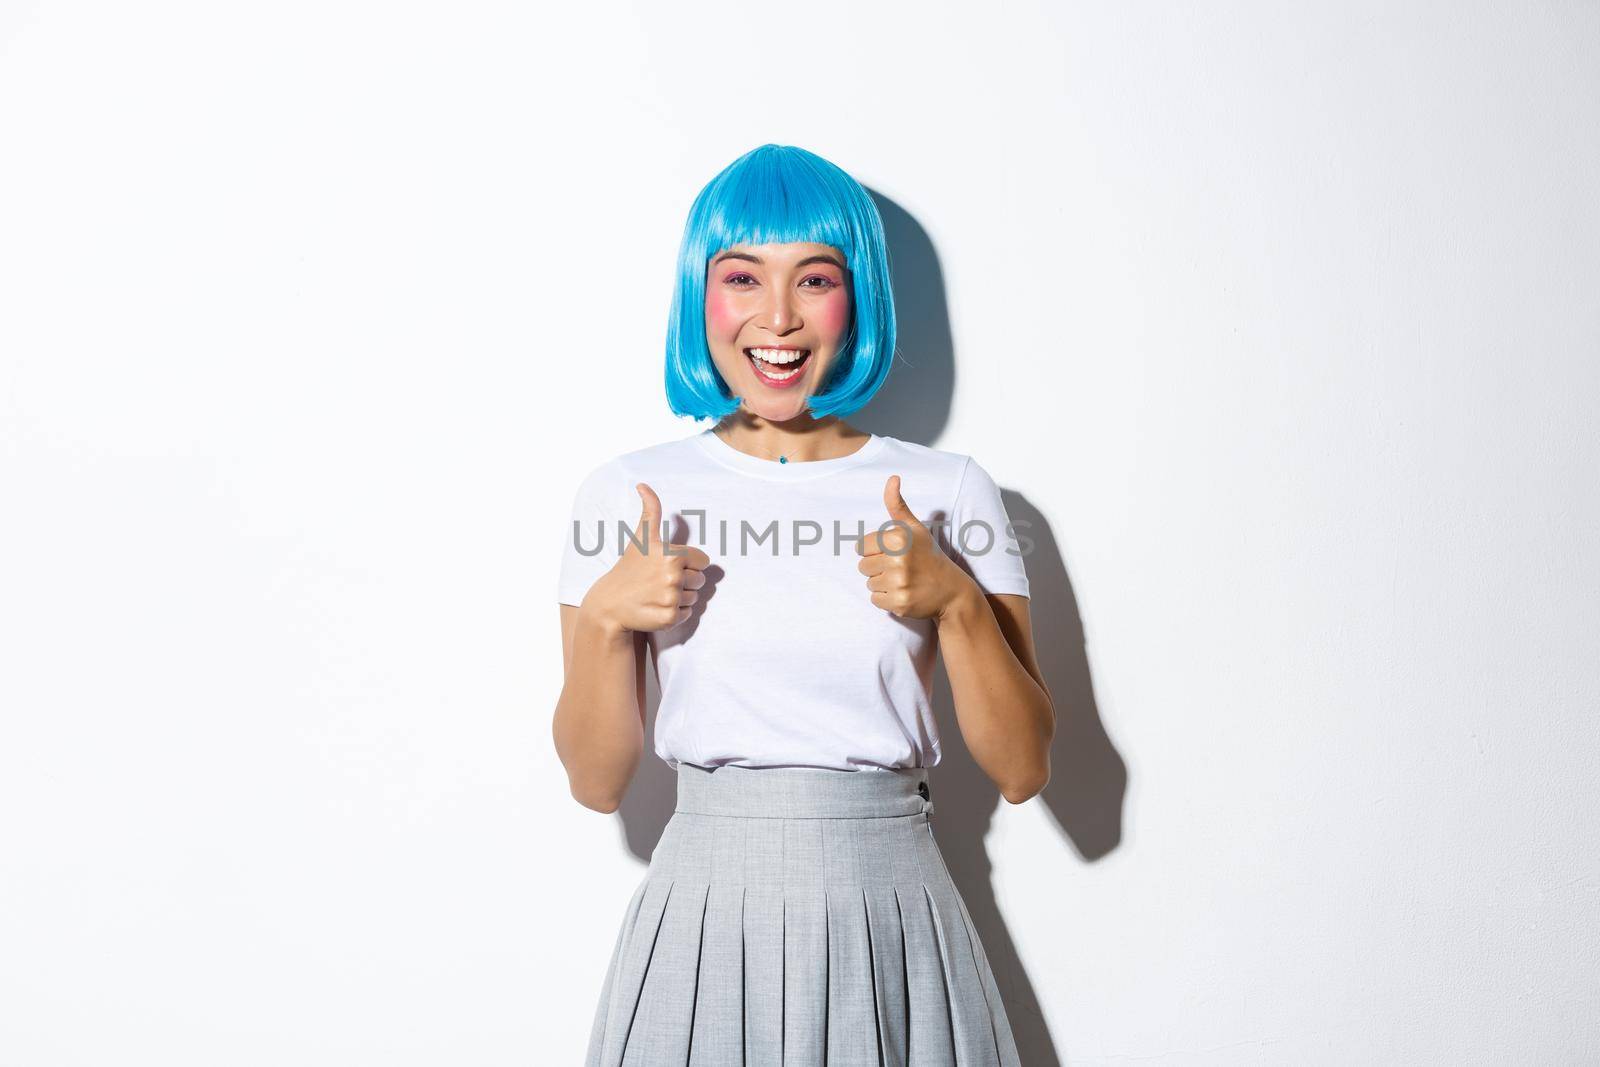 Cheerful cute asian girl in blue wig looking satisfied, smiling and showing thumbs-up, wearing halloween outfit, standing over white background.